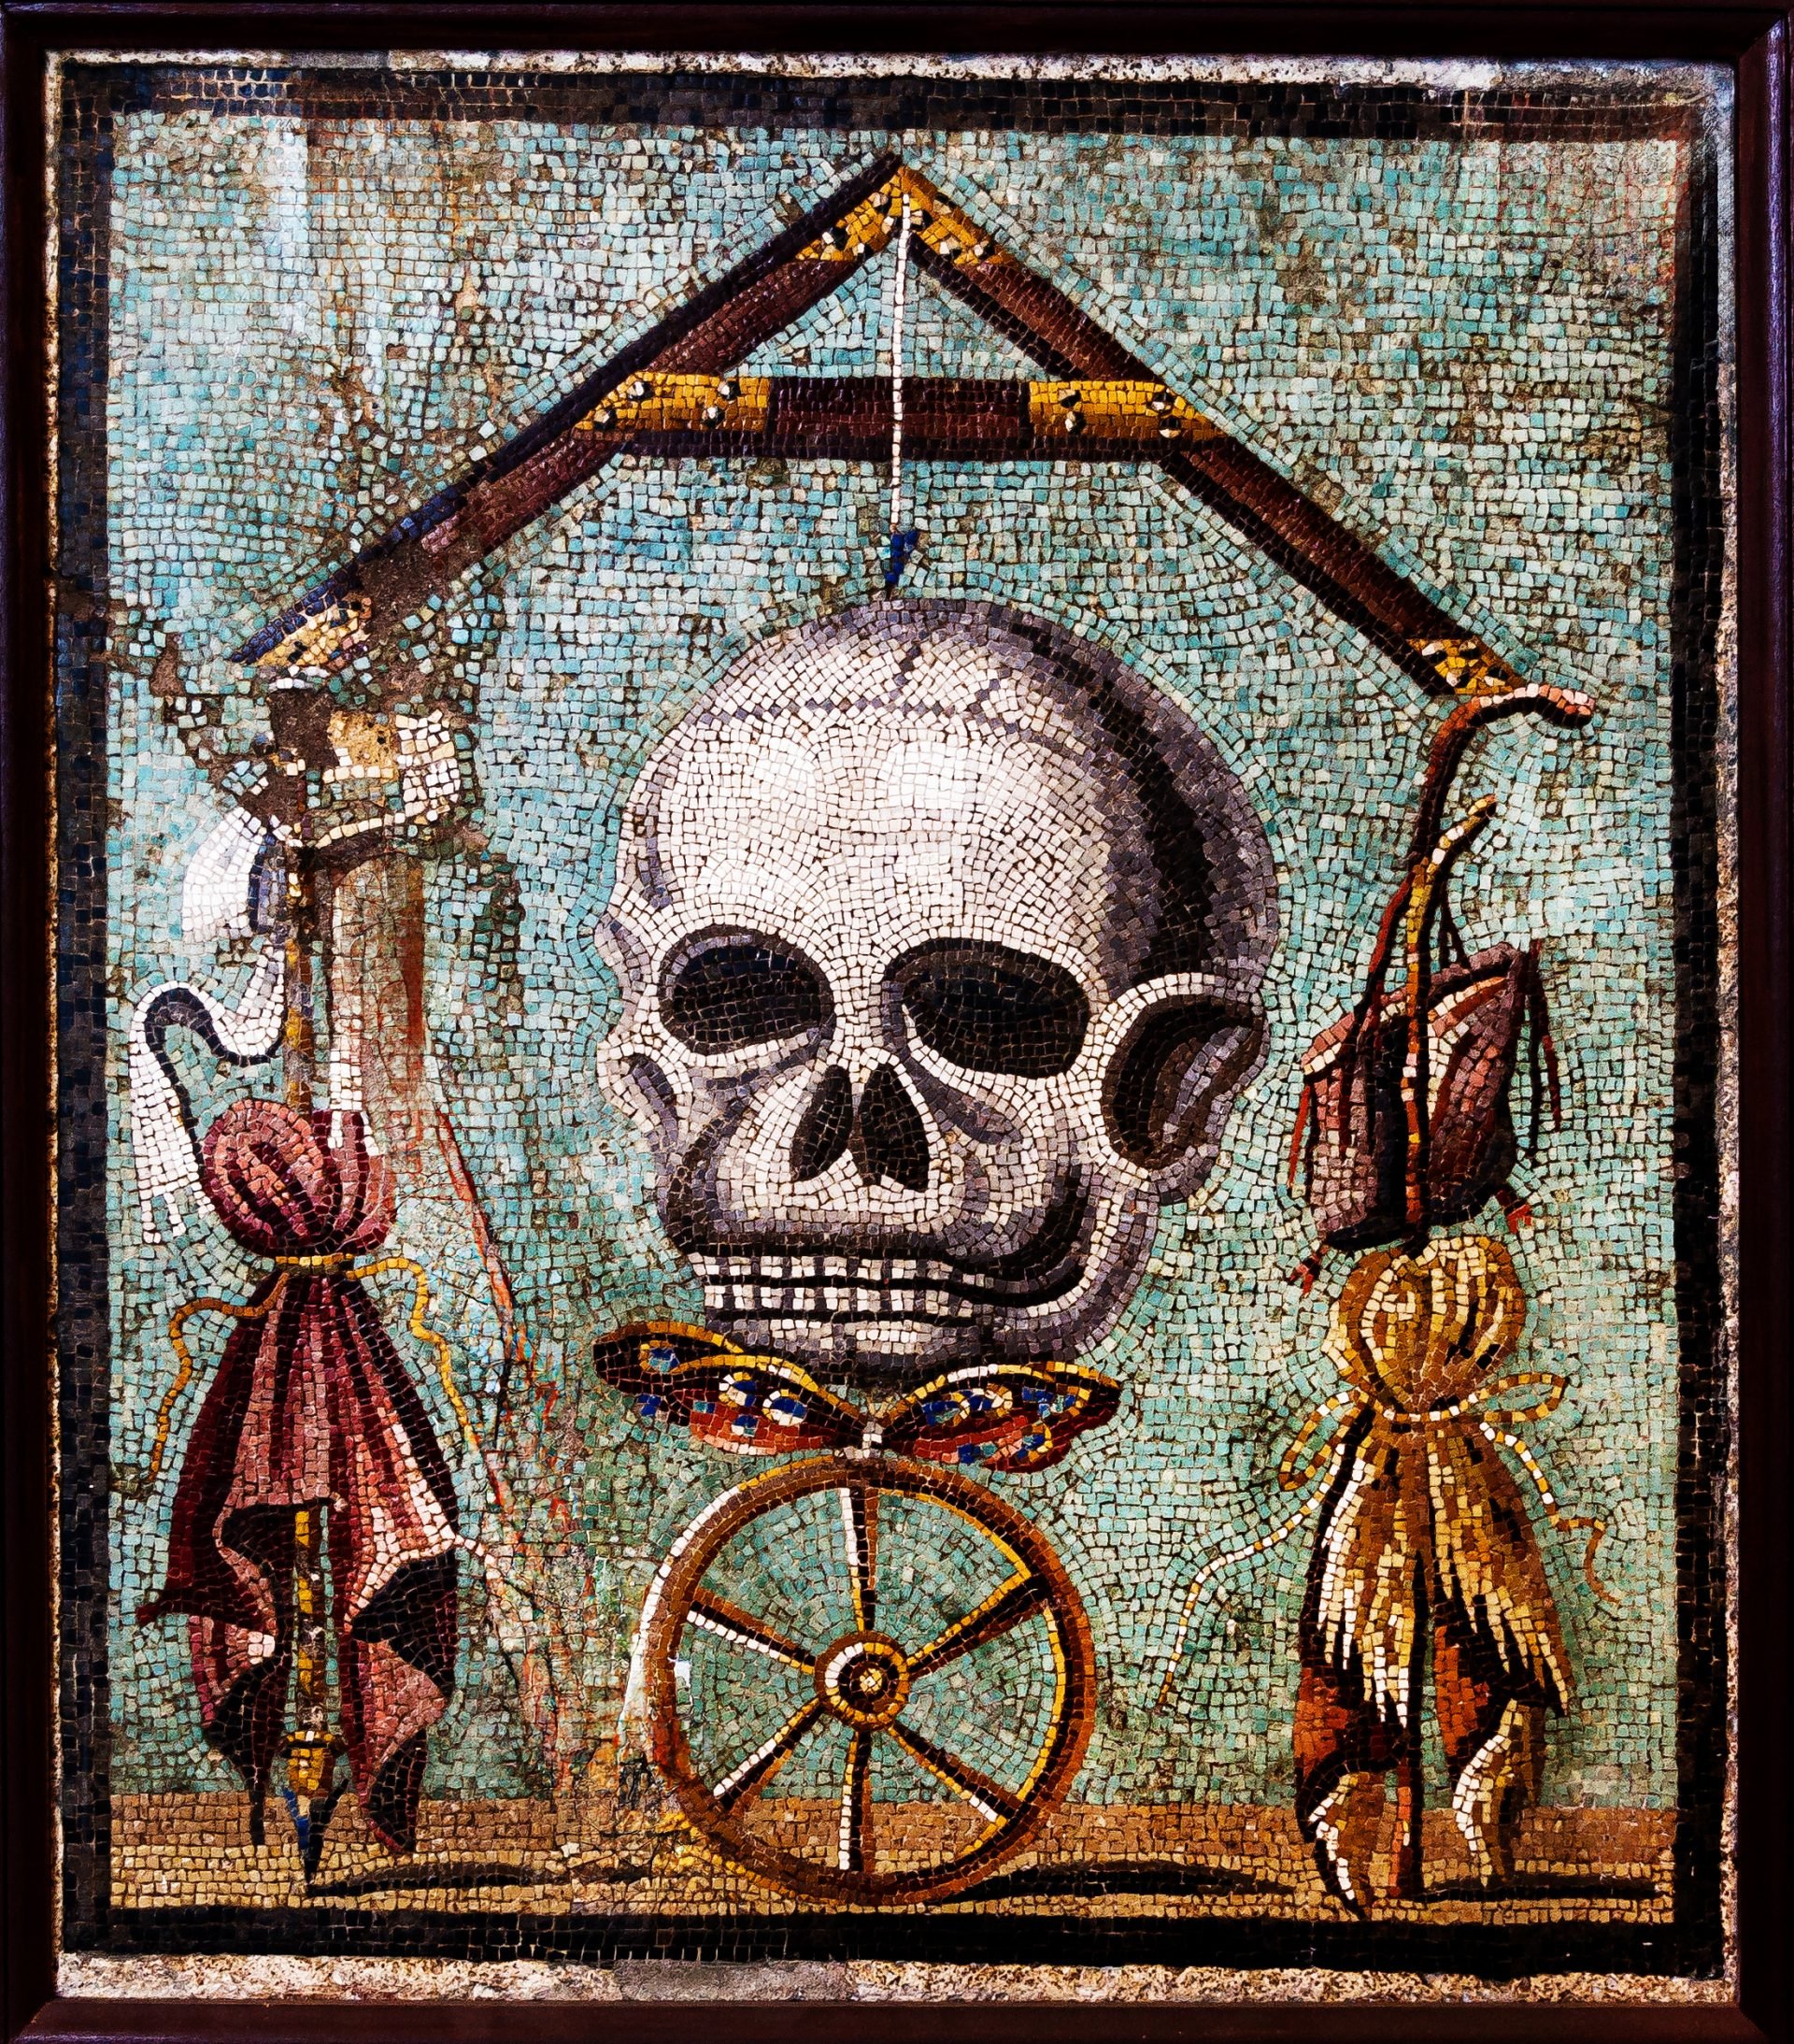 Roman mosaic from the National Archaeological Museum, Naples, illustrating the Rota Fortunae (Wheel of Fortune) symbolizing life's transient nature (Memento Mori), the unpredictable shifts of fortune, and the inevitable approach of death, emphasizing the ultimate equality of all souls upon departure.